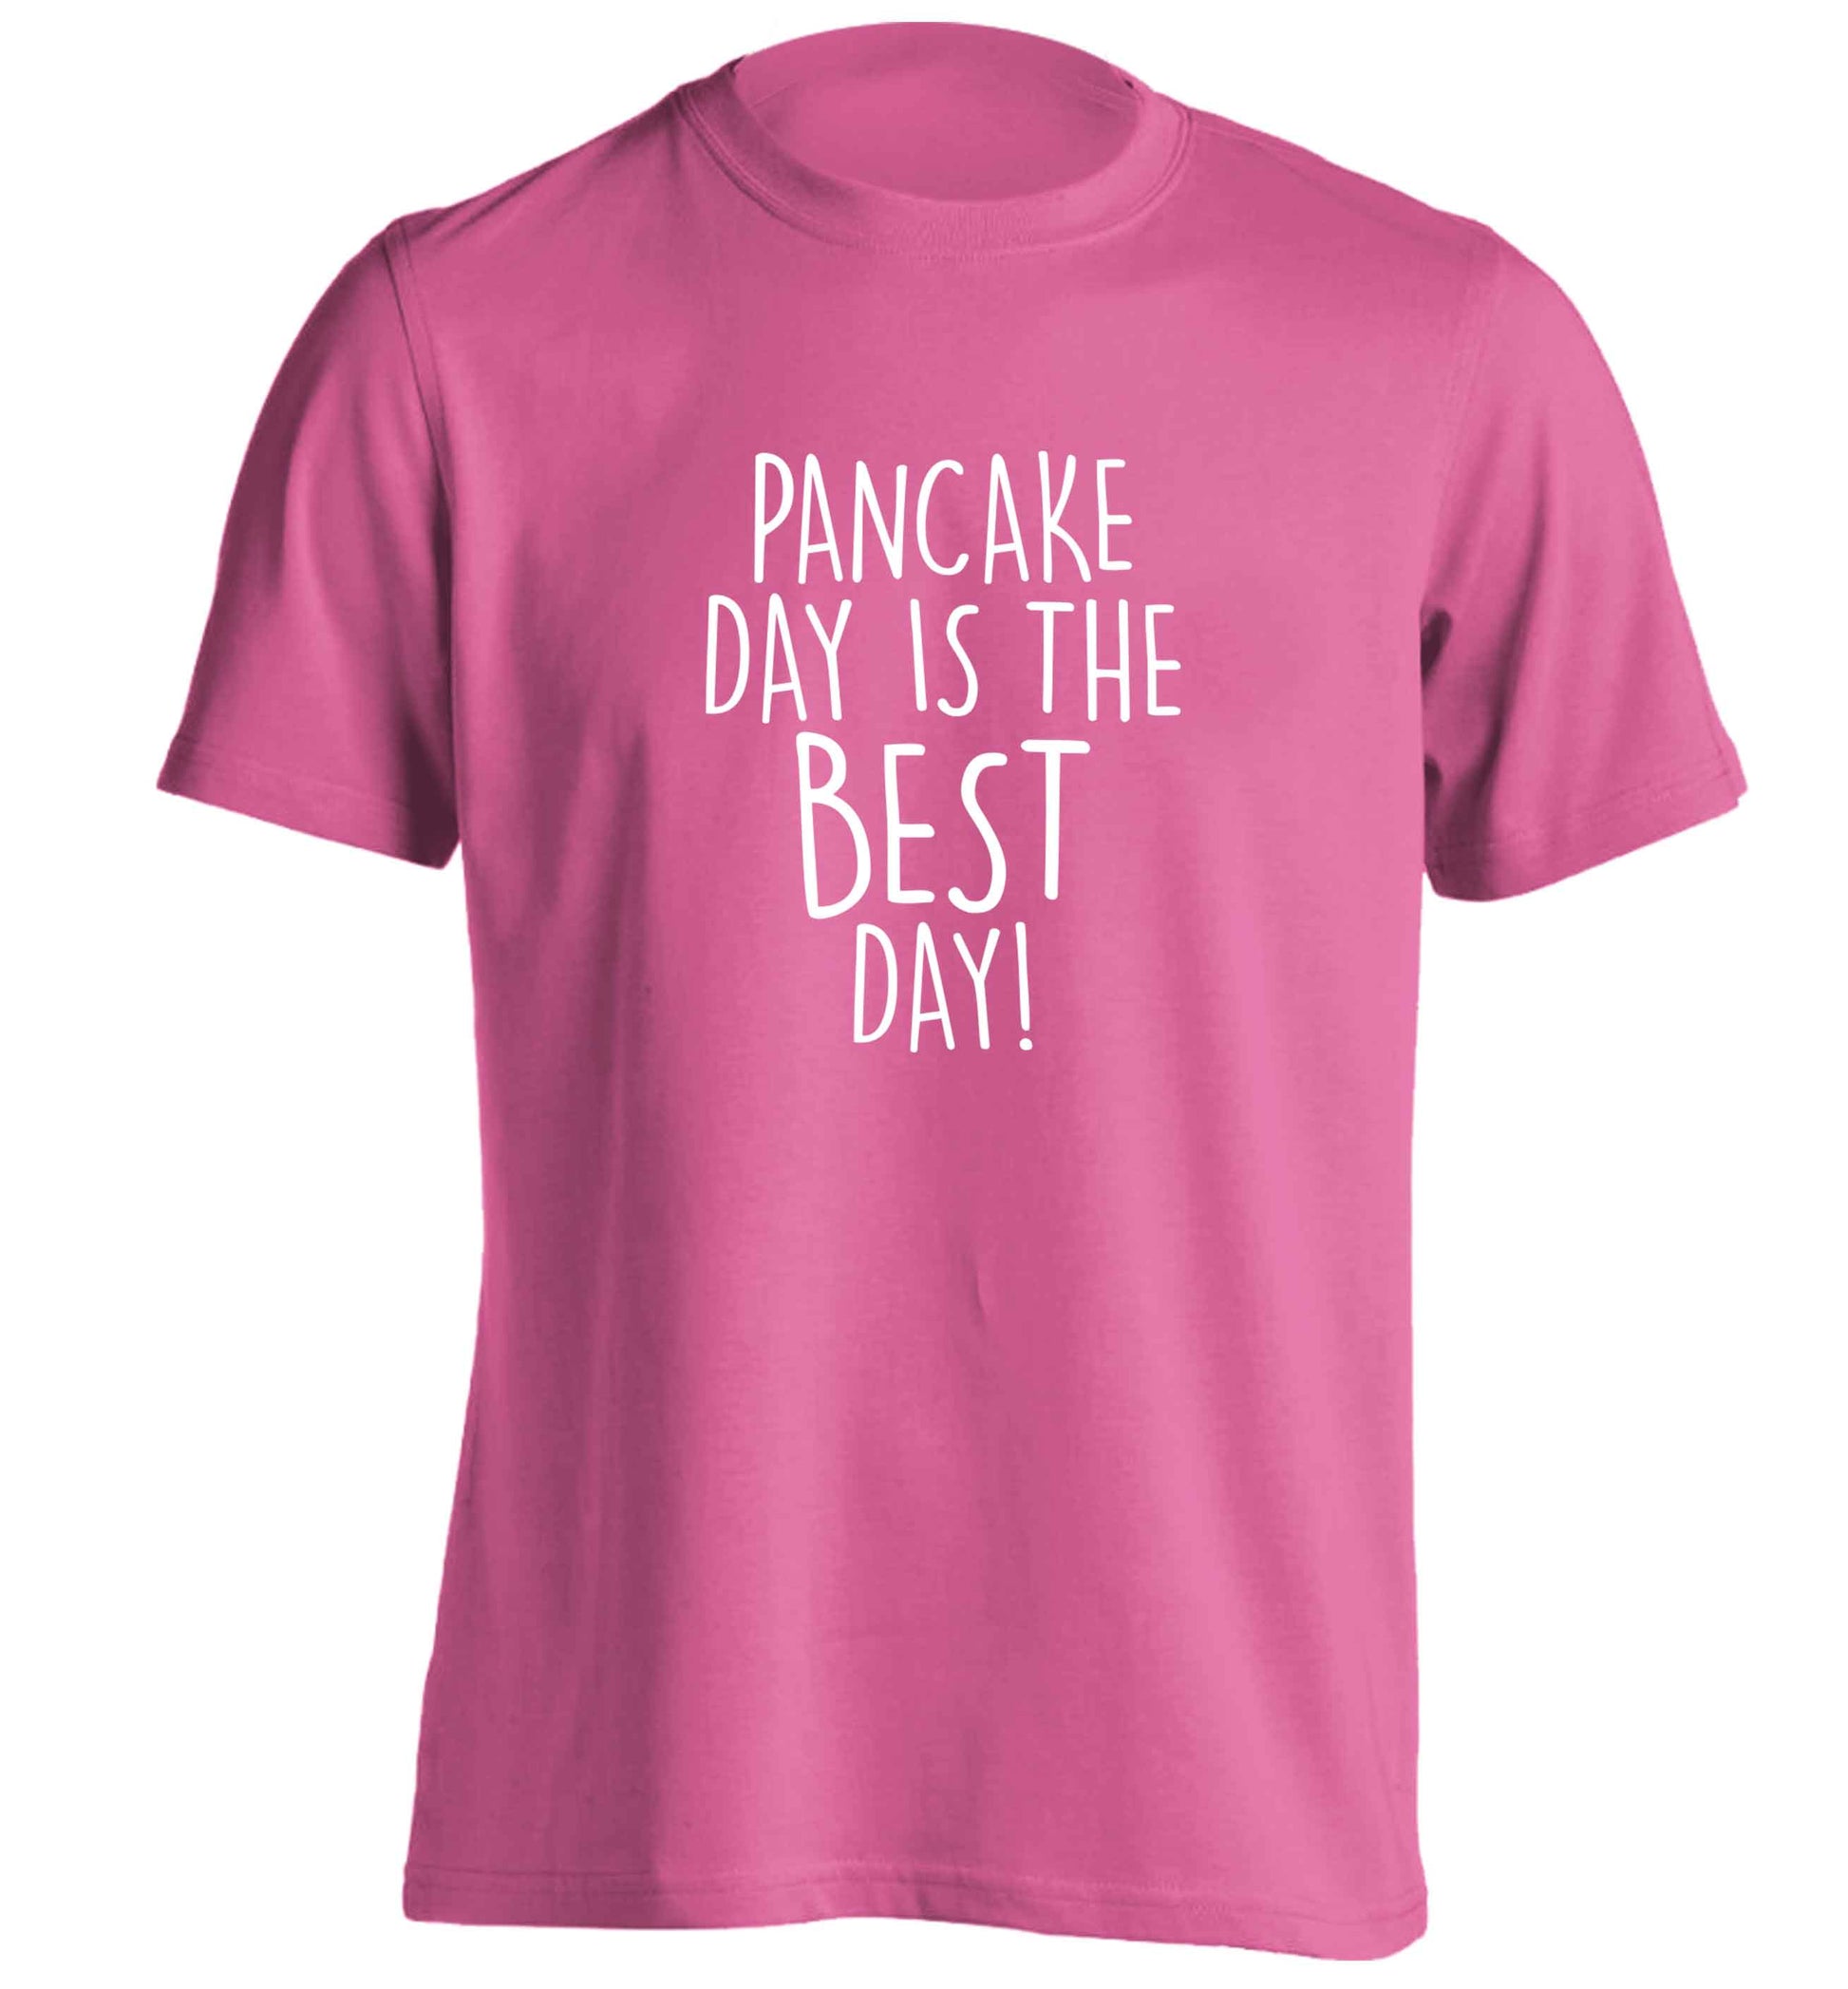 Pancake day is the best day adults unisex pink Tshirt 2XL